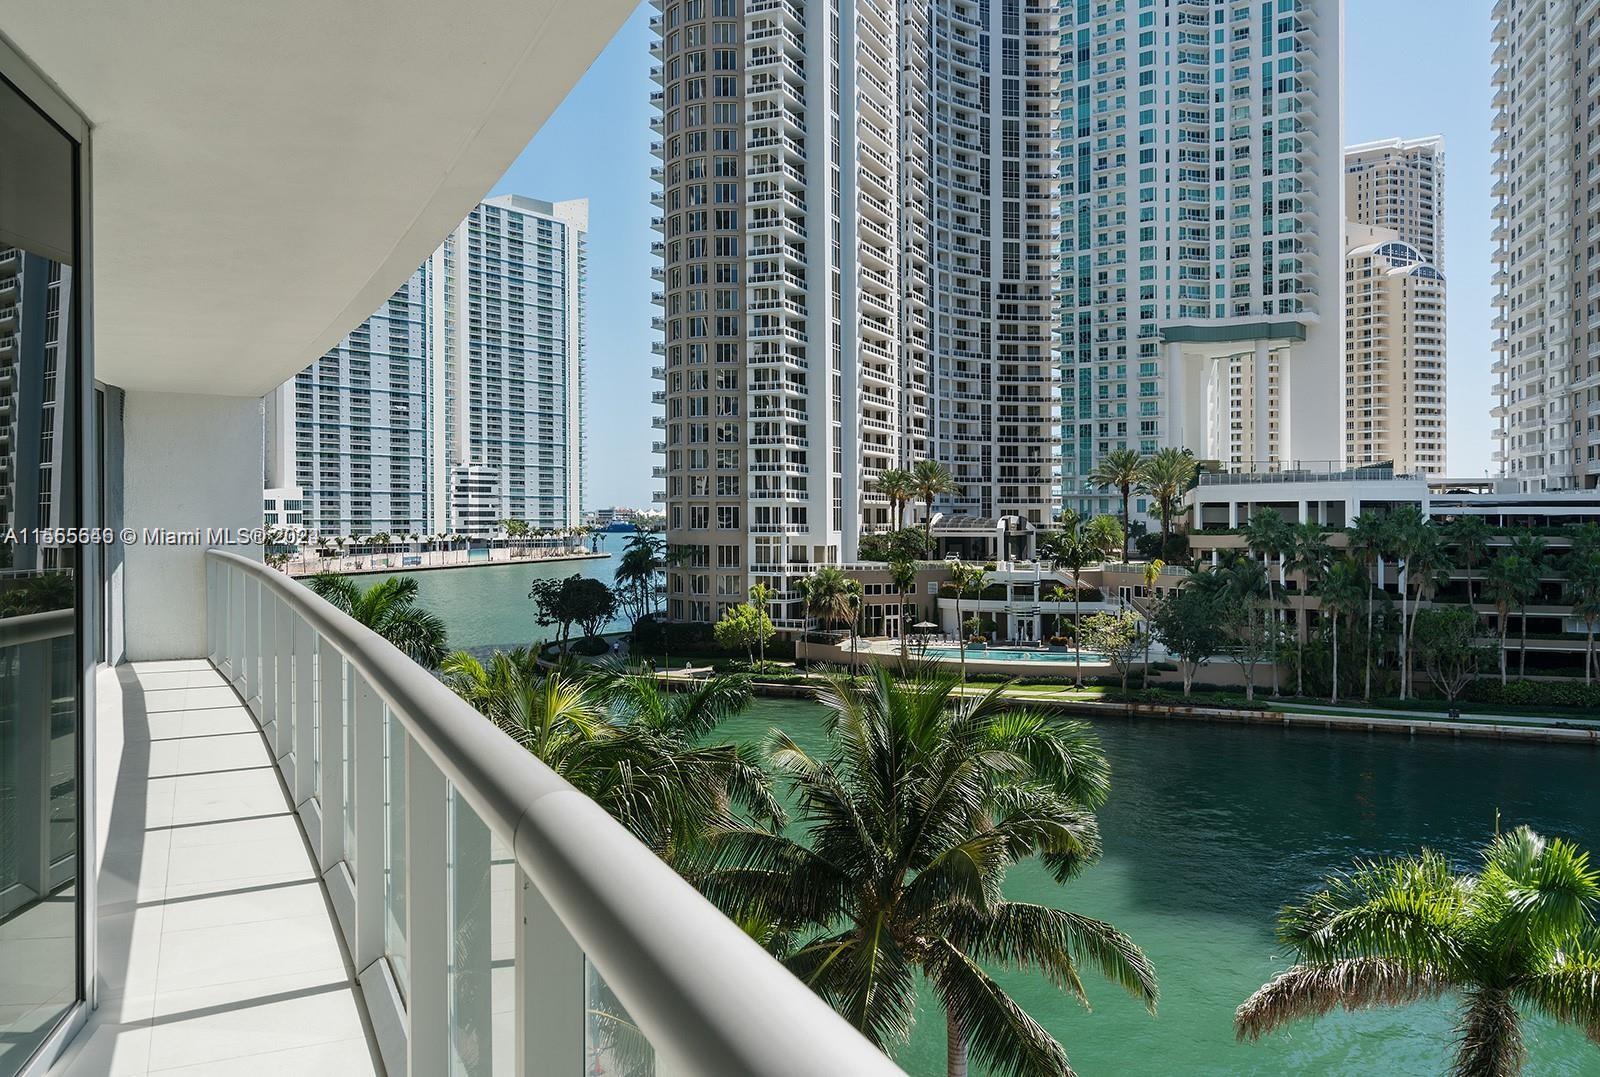 PRICED TO SELL !!!.
DIRECT BAY VIEWS from this Spacious 2 Bedrooms + Den, 2 Full Baths Residence (BAYLINER). Impeccable condition with Renovated Master Bathroom. 1 assigned parking space. Great amenities including infinity pool overlooking Biscayne Bay, fitness center, convenient store, spa, Great Location !. VACANT, easy to show.